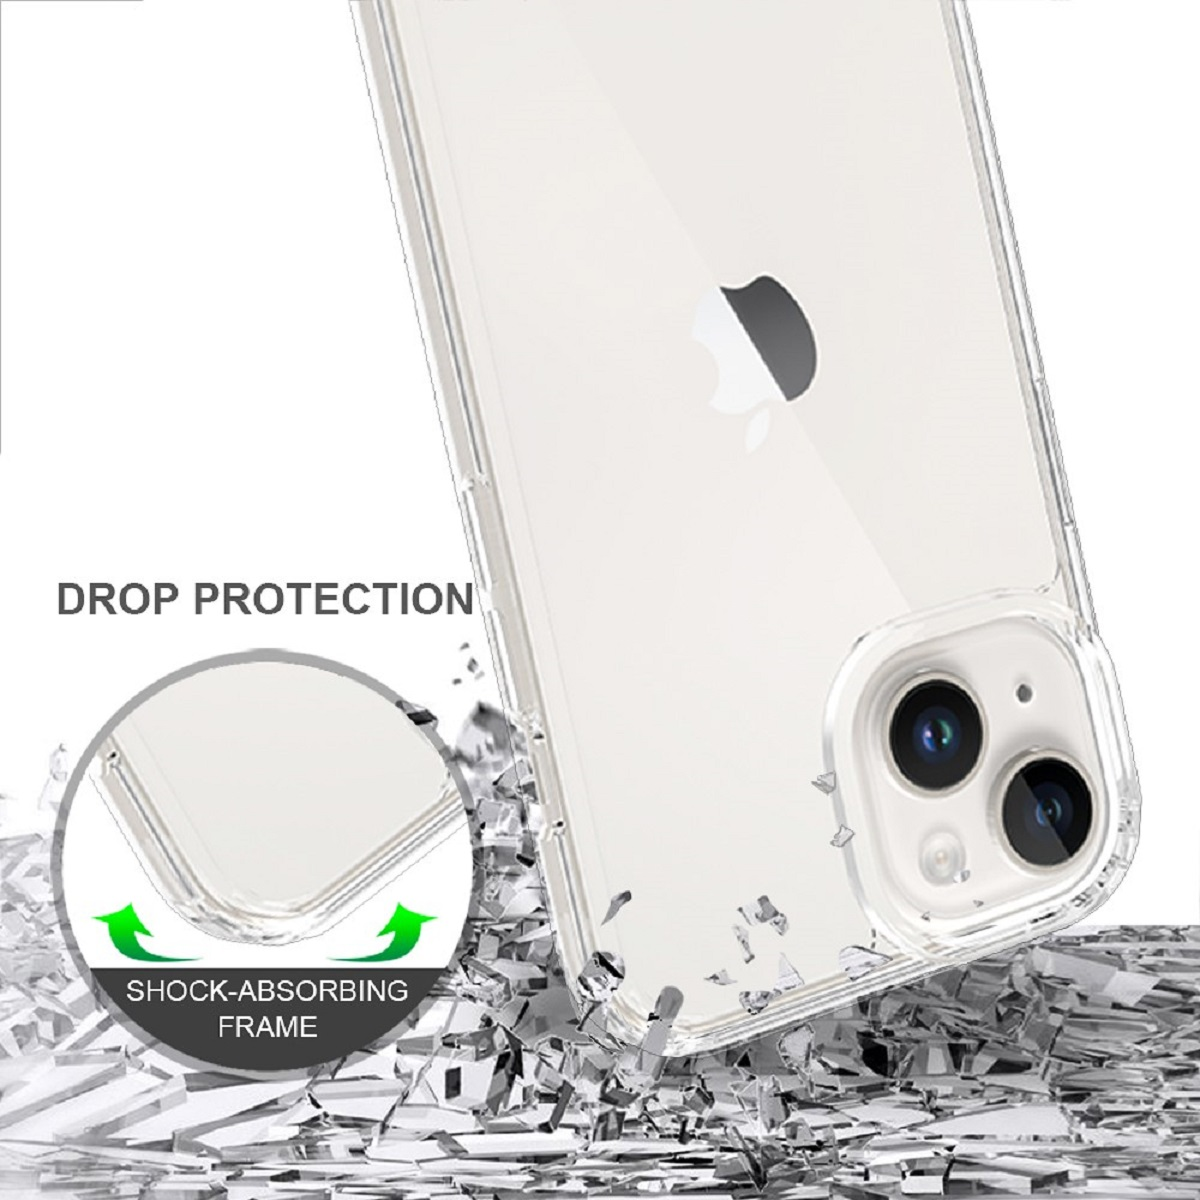 Apple, BERLIN transparent iPhone Backcover, 15, JT Pankow Clear,